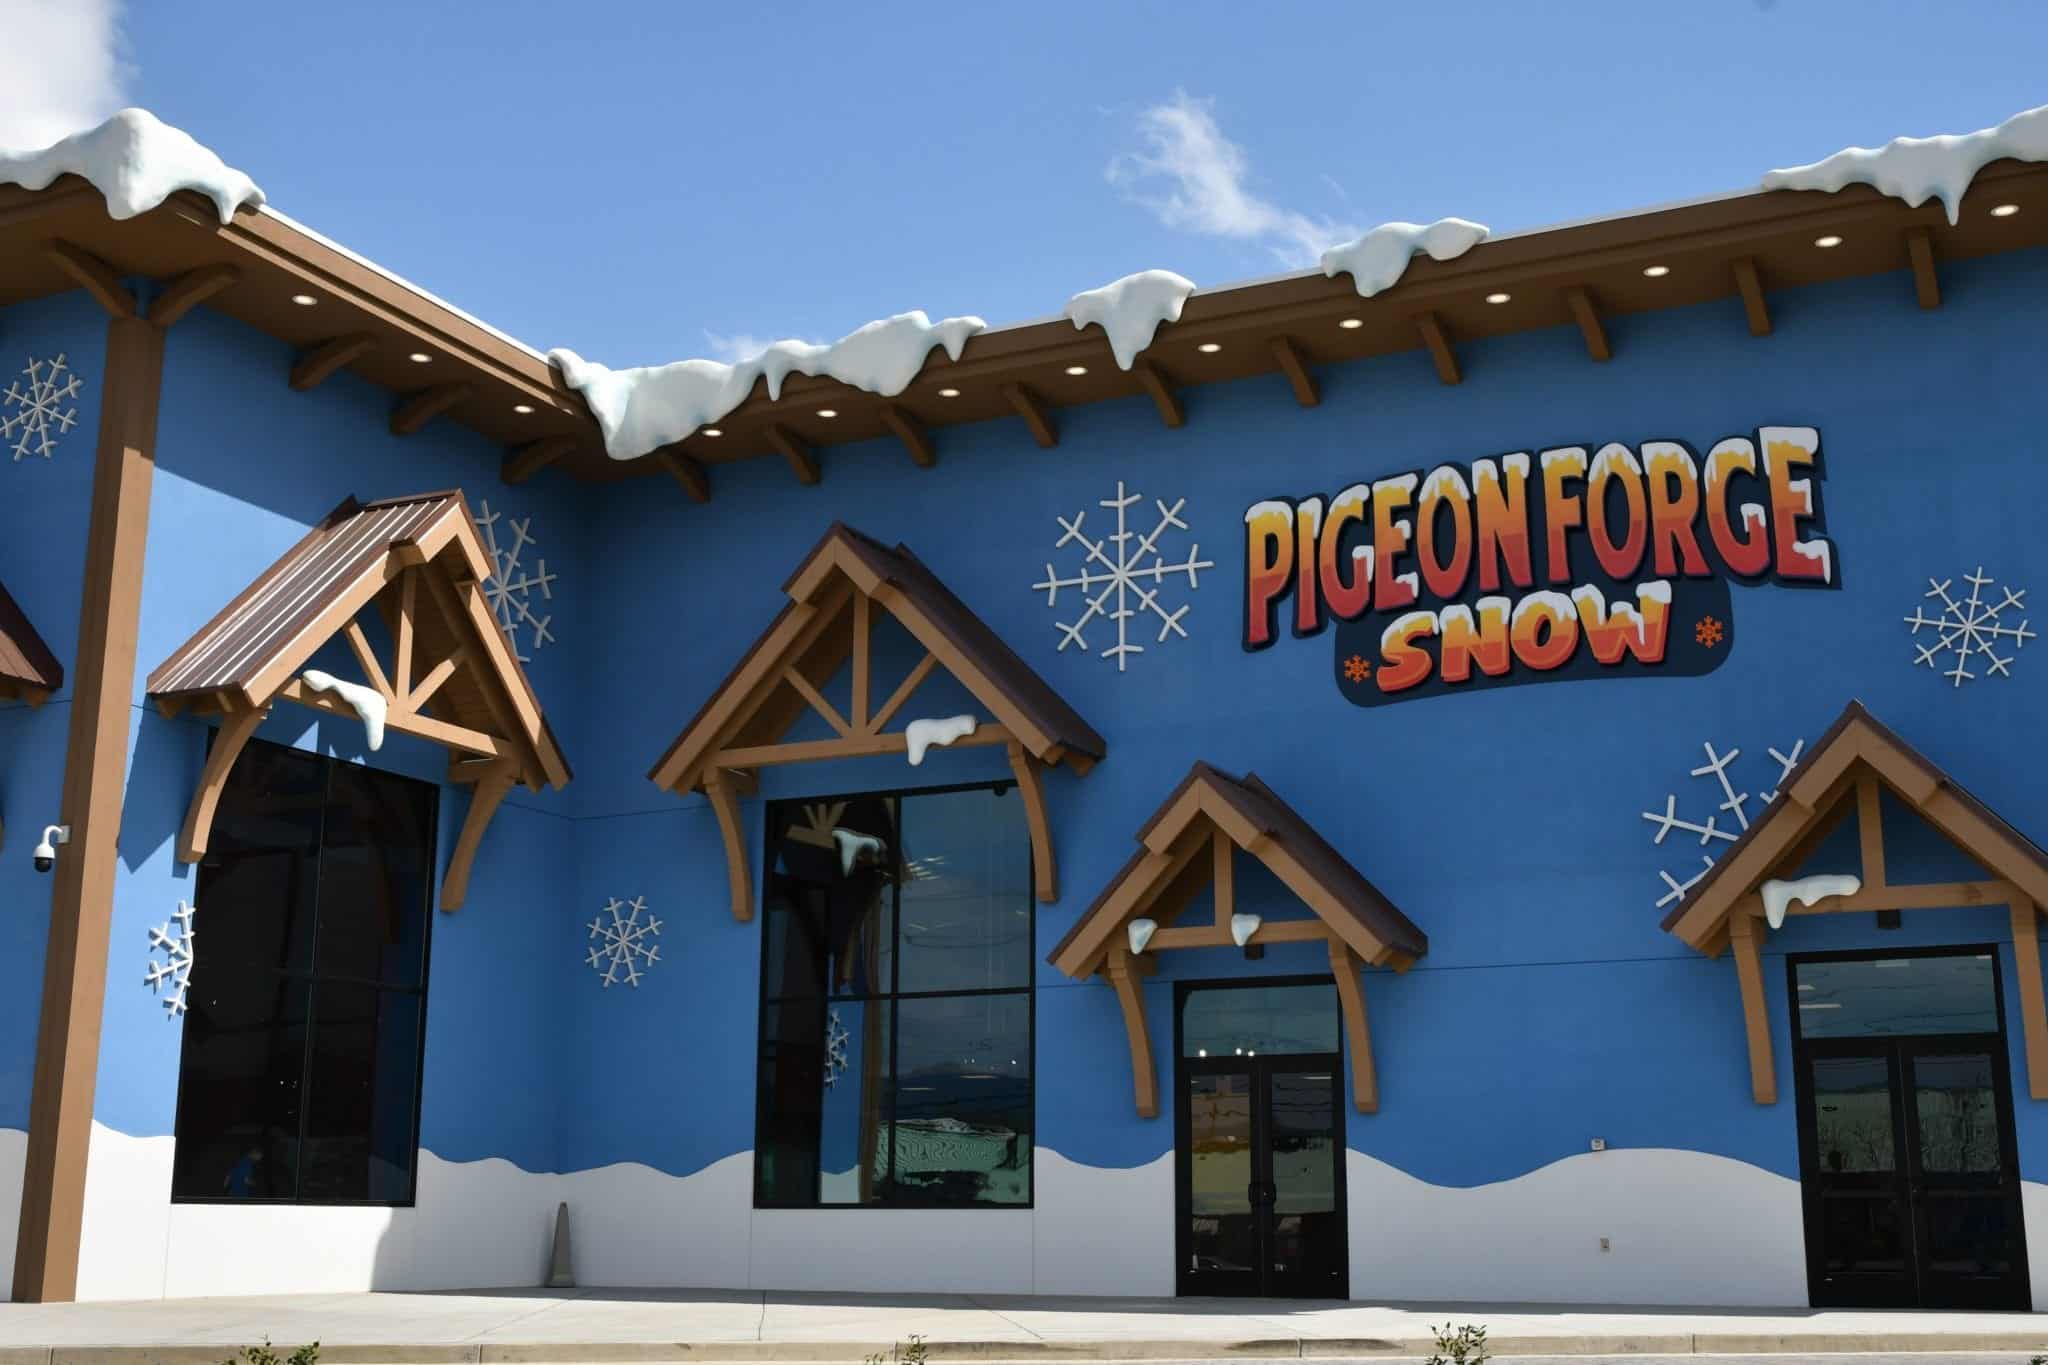 Enjoy Snow Tubing in Pigeon Forge TN All Year at Pigeon Forge Snow